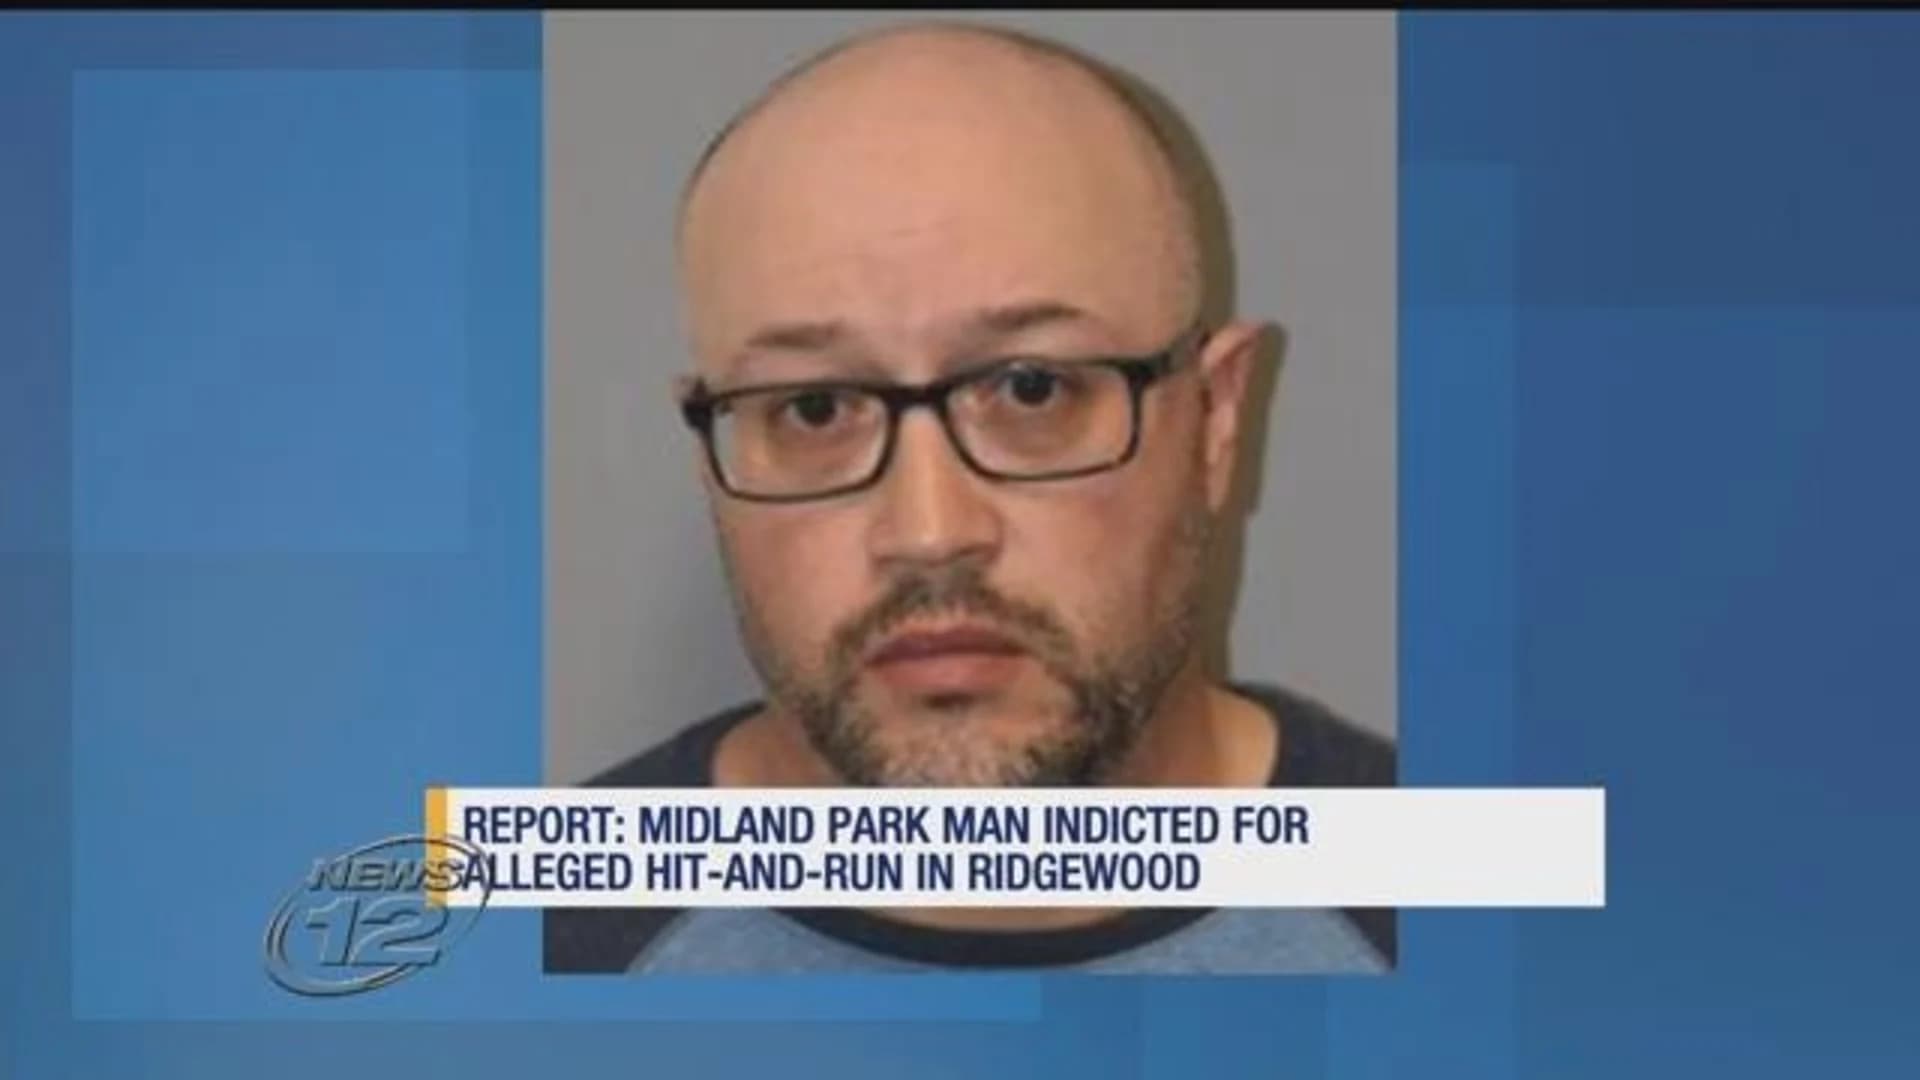 Midland Park postal worker charged in deadly hit-and-run